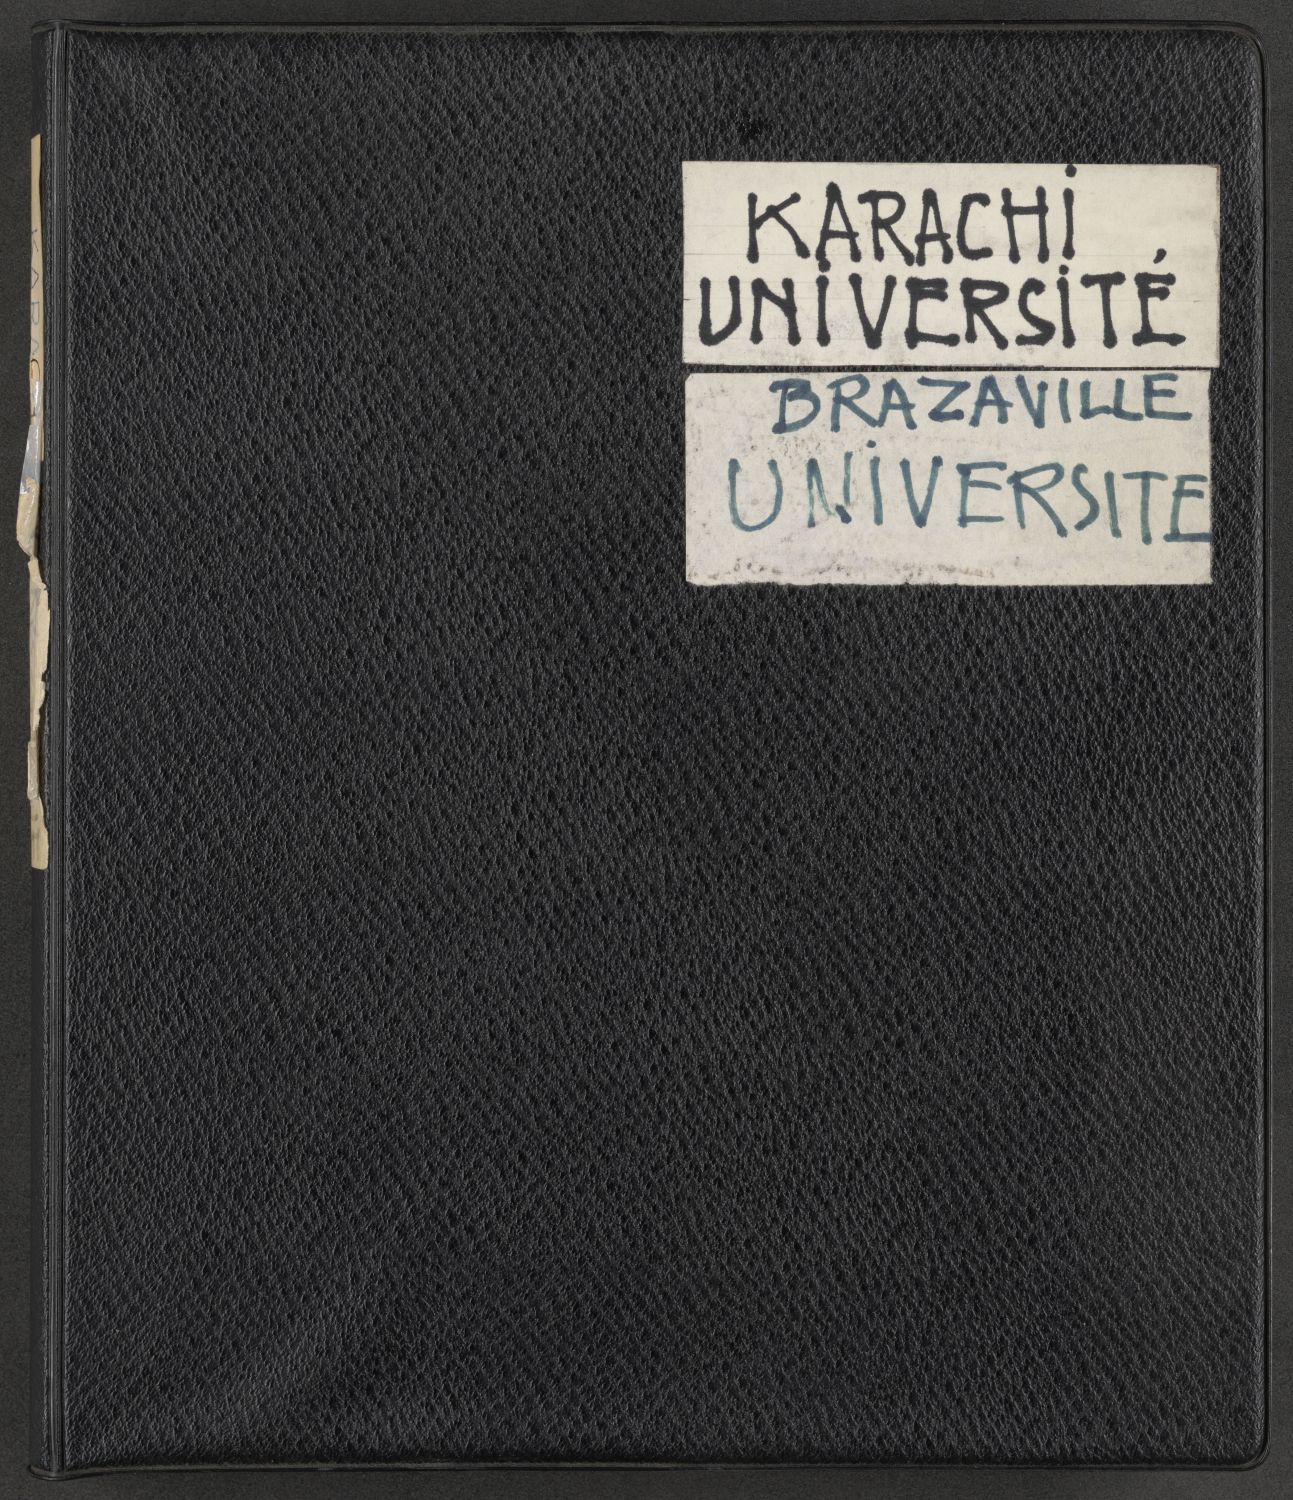 University of Karachi - <div style="text-align: justify;">Album of photos documenting the construction of the&nbsp;<a href="https://archnet.org/sites/9414" target="_blank" data-bypass="true">University of Karachi</a>, whose master plan Michel Écochard designed in the early 1950s. The photos, pasted onto yellow and red paper, show buildings and landscapes in various states of completion and is dated. The title page bears the date 1956. Within the album, a&nbsp;<a href="https://archnet.org/publications/14318" target="_blank" data-bypass="true">red folder labled "Brazaville"</a>&nbsp;contains photographs of the&nbsp;<a href="https://archnet.org/sites/9943" target="_blank" data-bypass="true">Centre d 'Enseignement Supérieur de Brazzaville</a>&nbsp;(Université de Brazzaville, now Université&nbsp;Marien Ngouabi or UMNG), which Écochard helped design in the 1960s.</div>